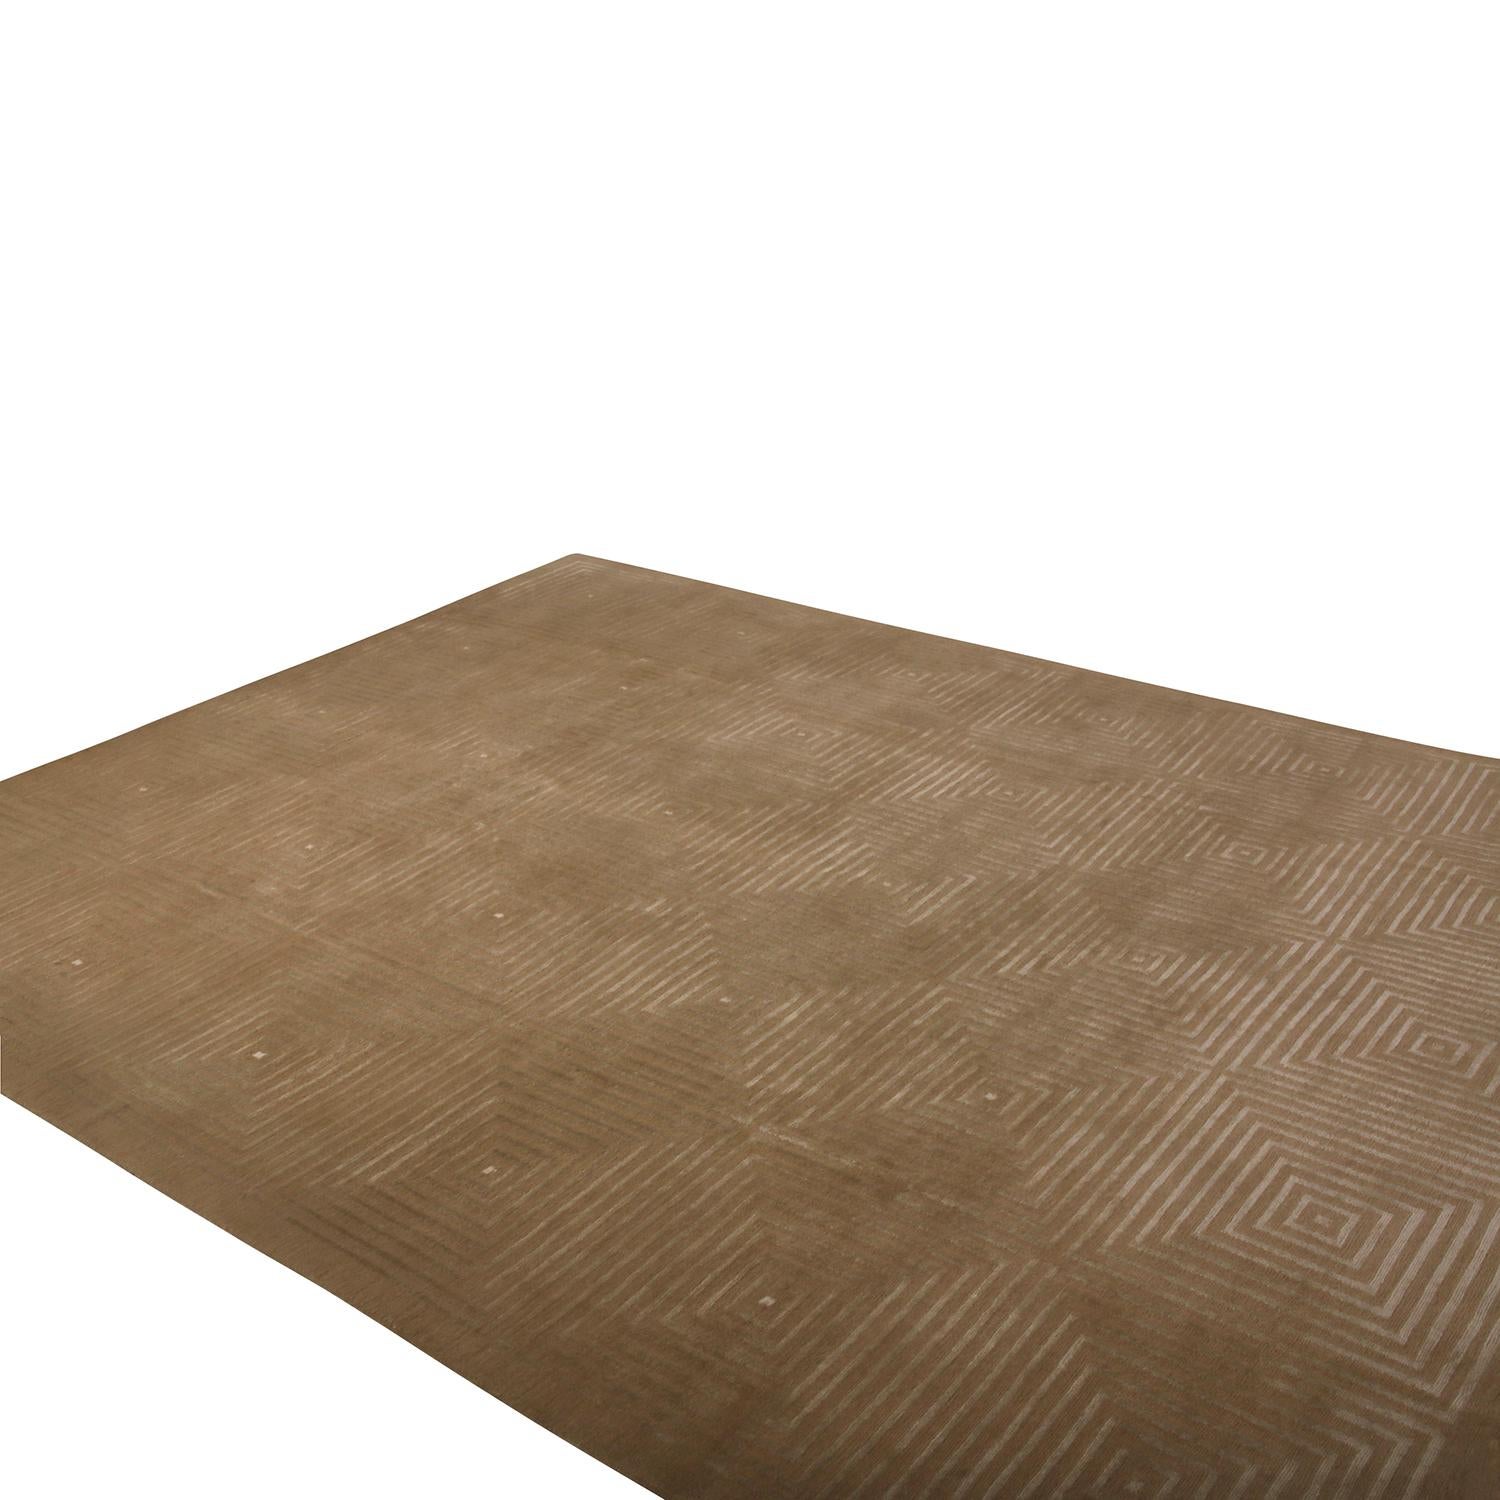 Exemplifying Cubist & Austrian Deco sensibilities, this 8x9 drawing from Rug & Kilim’s New & Modern collection employs geometry at its finest with a detailed fret pattern in luscious brown & off white beautifully lending a gorgeous sense of movement